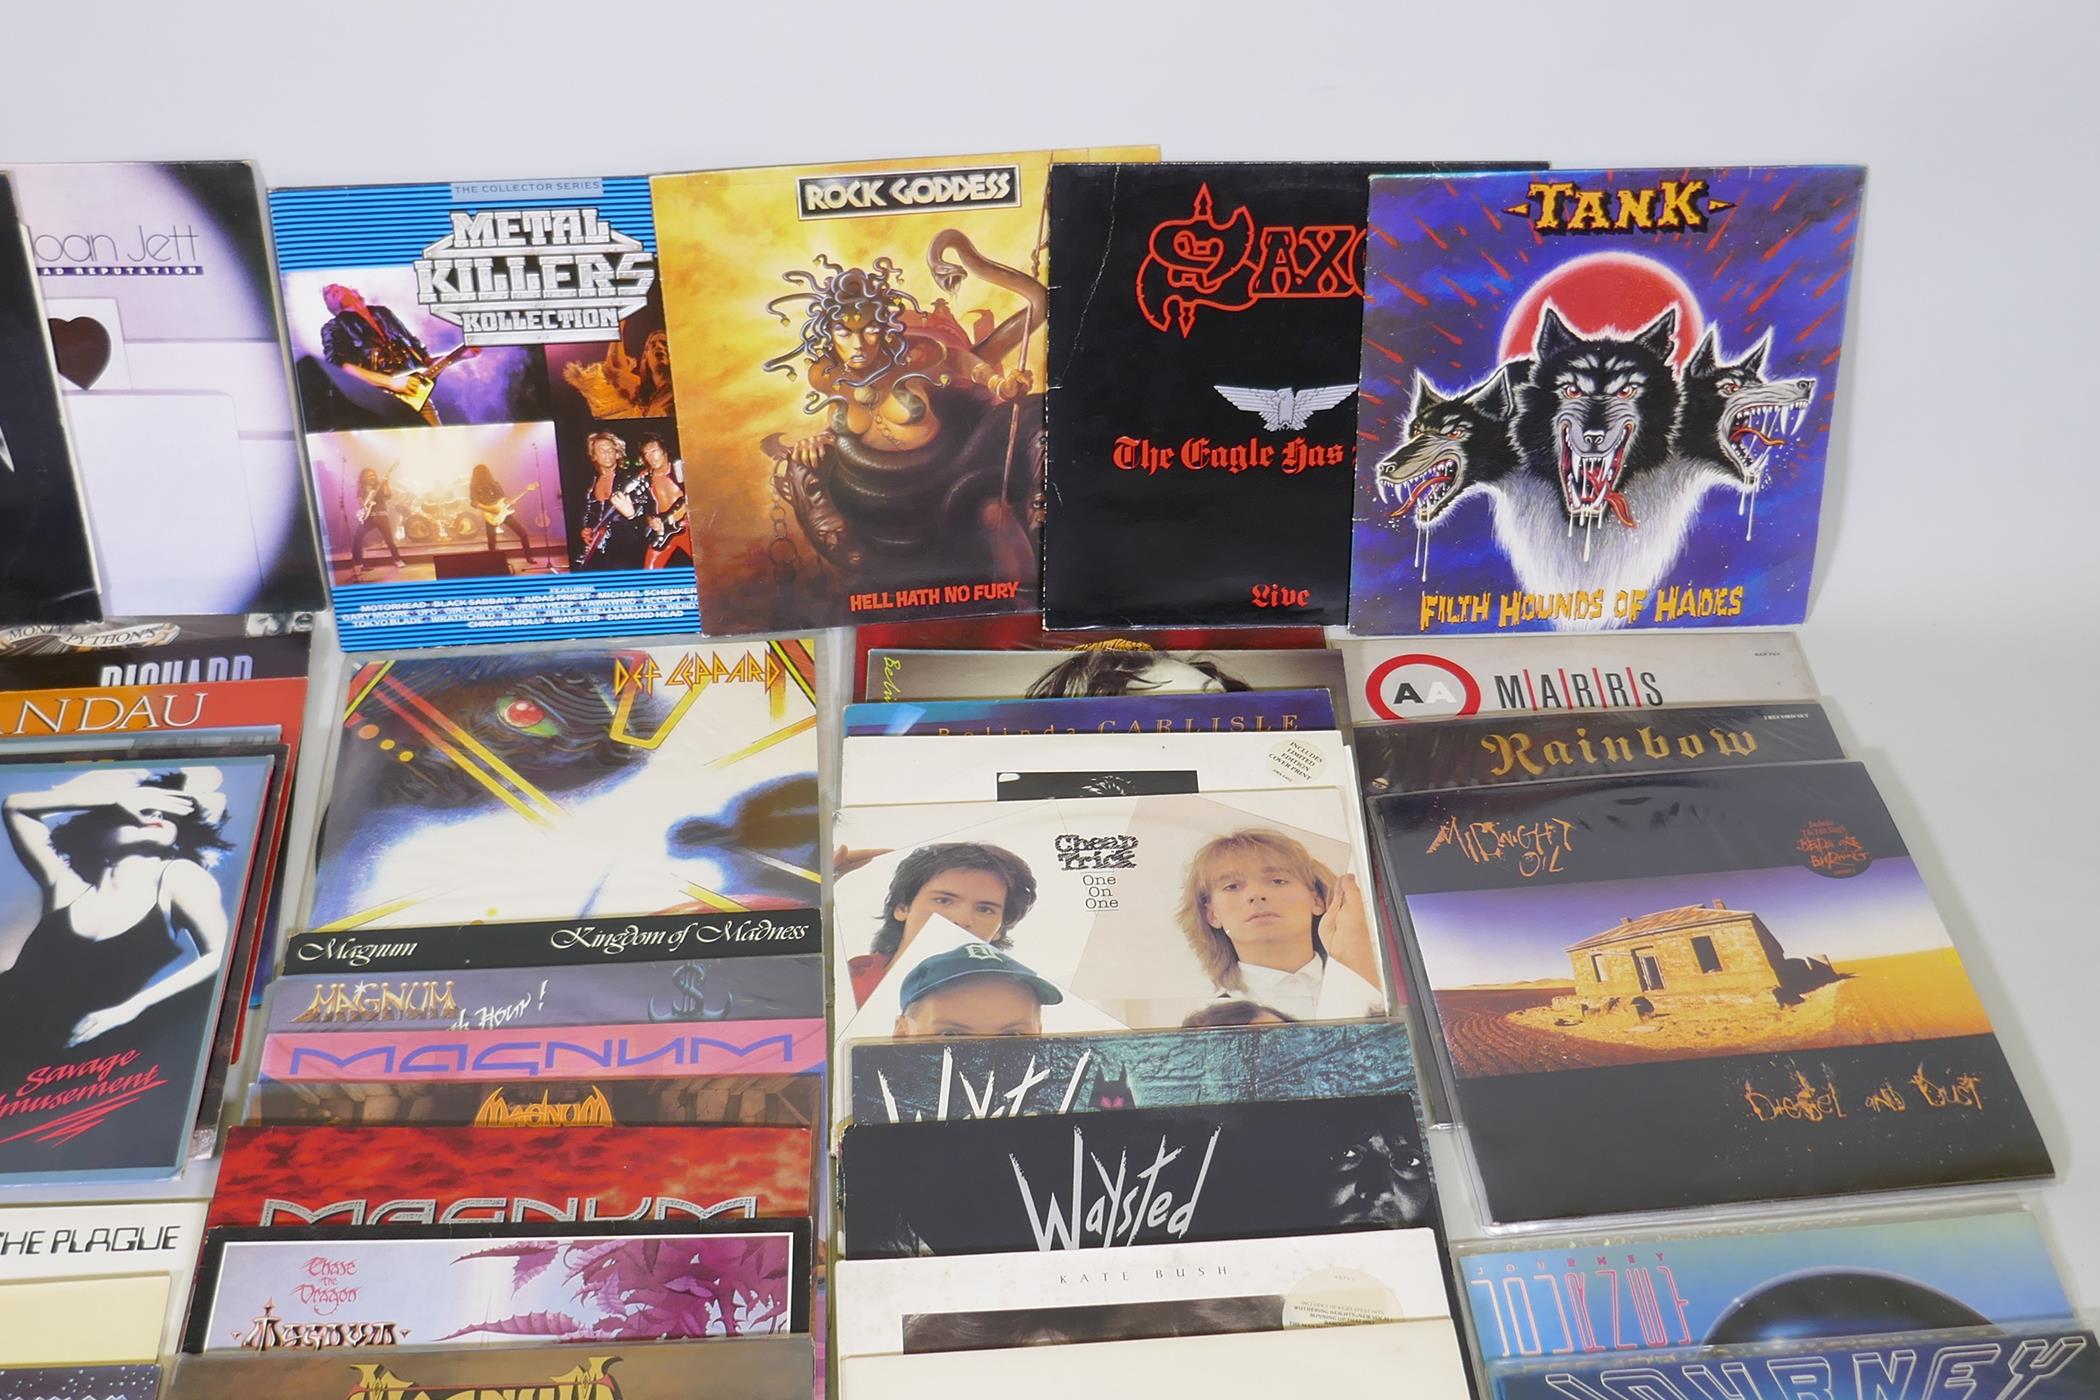 A quantity of 12" metal and rock vinyl LPs including Metallica, Meatloaf, Thin Lizzy, Motorhead, - Image 14 of 16